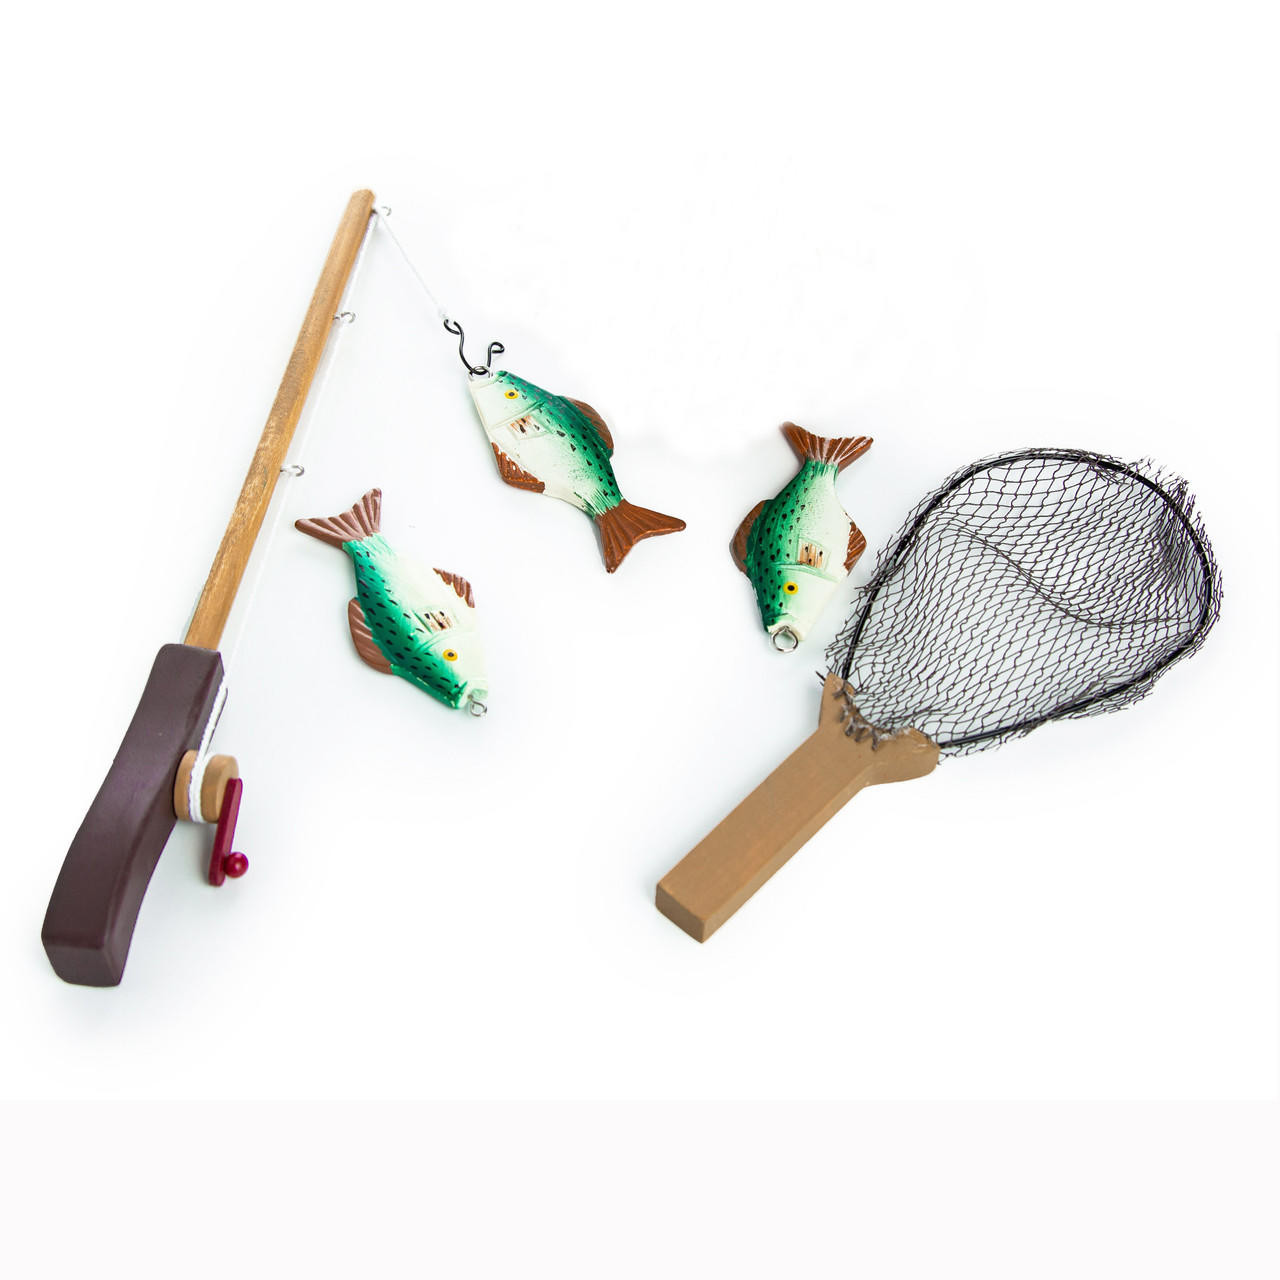 American Fishing Adventure Set for 18 Girl or Boy Doll